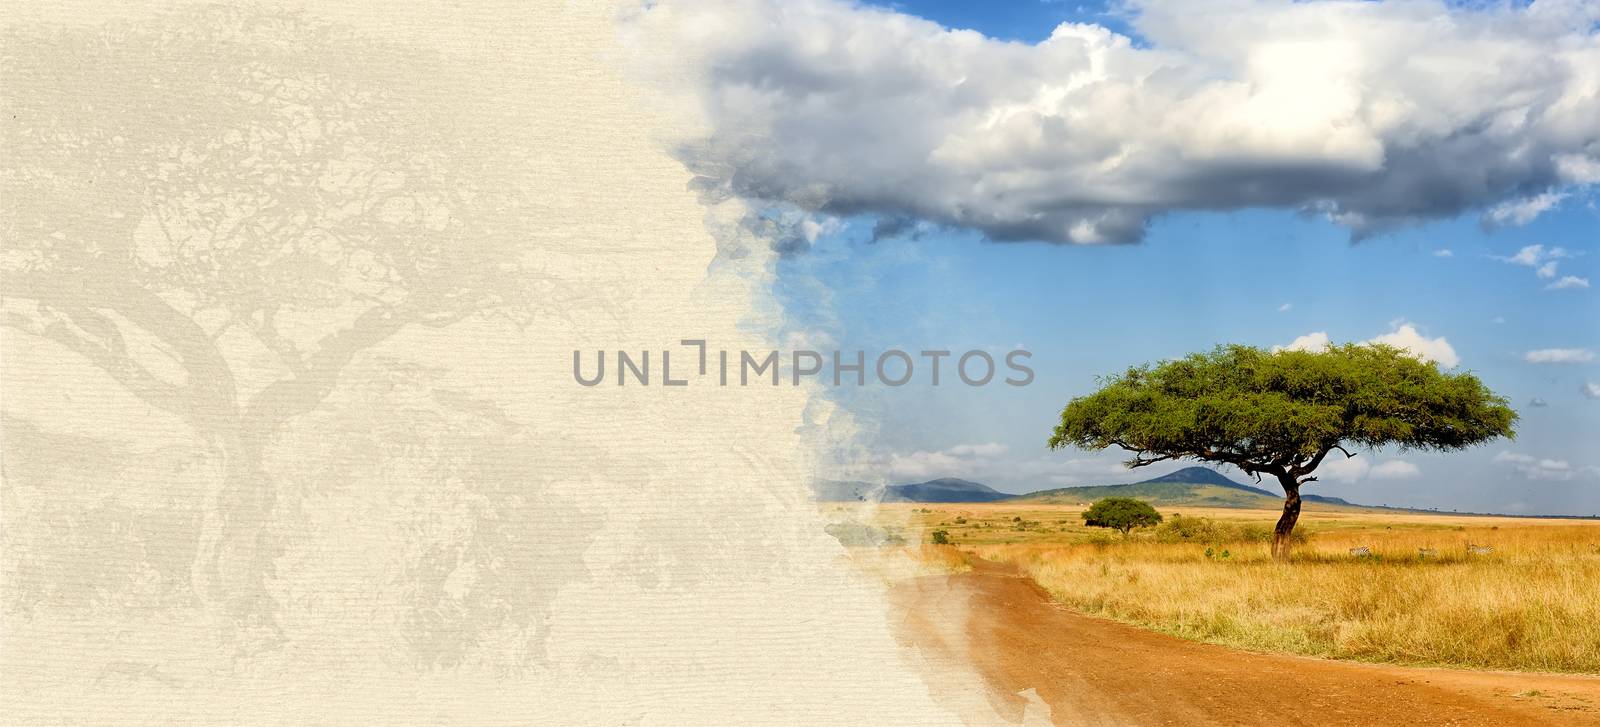 African landscape with acacia tree on textured paper by byrdyak